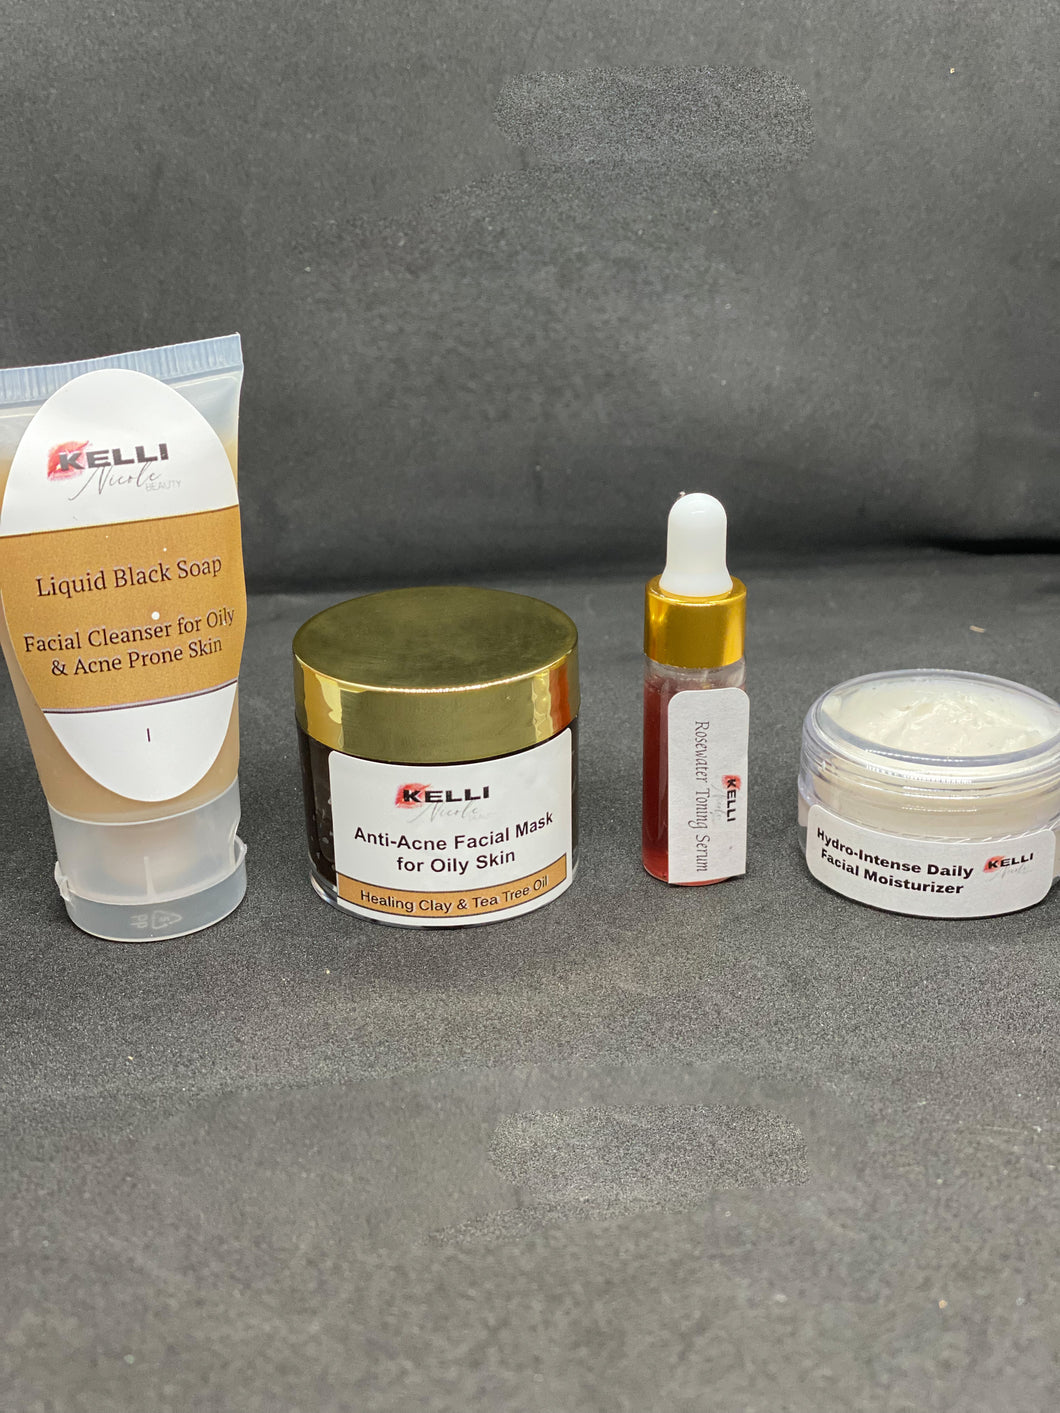 Anti-Acne Facial System (trial size)